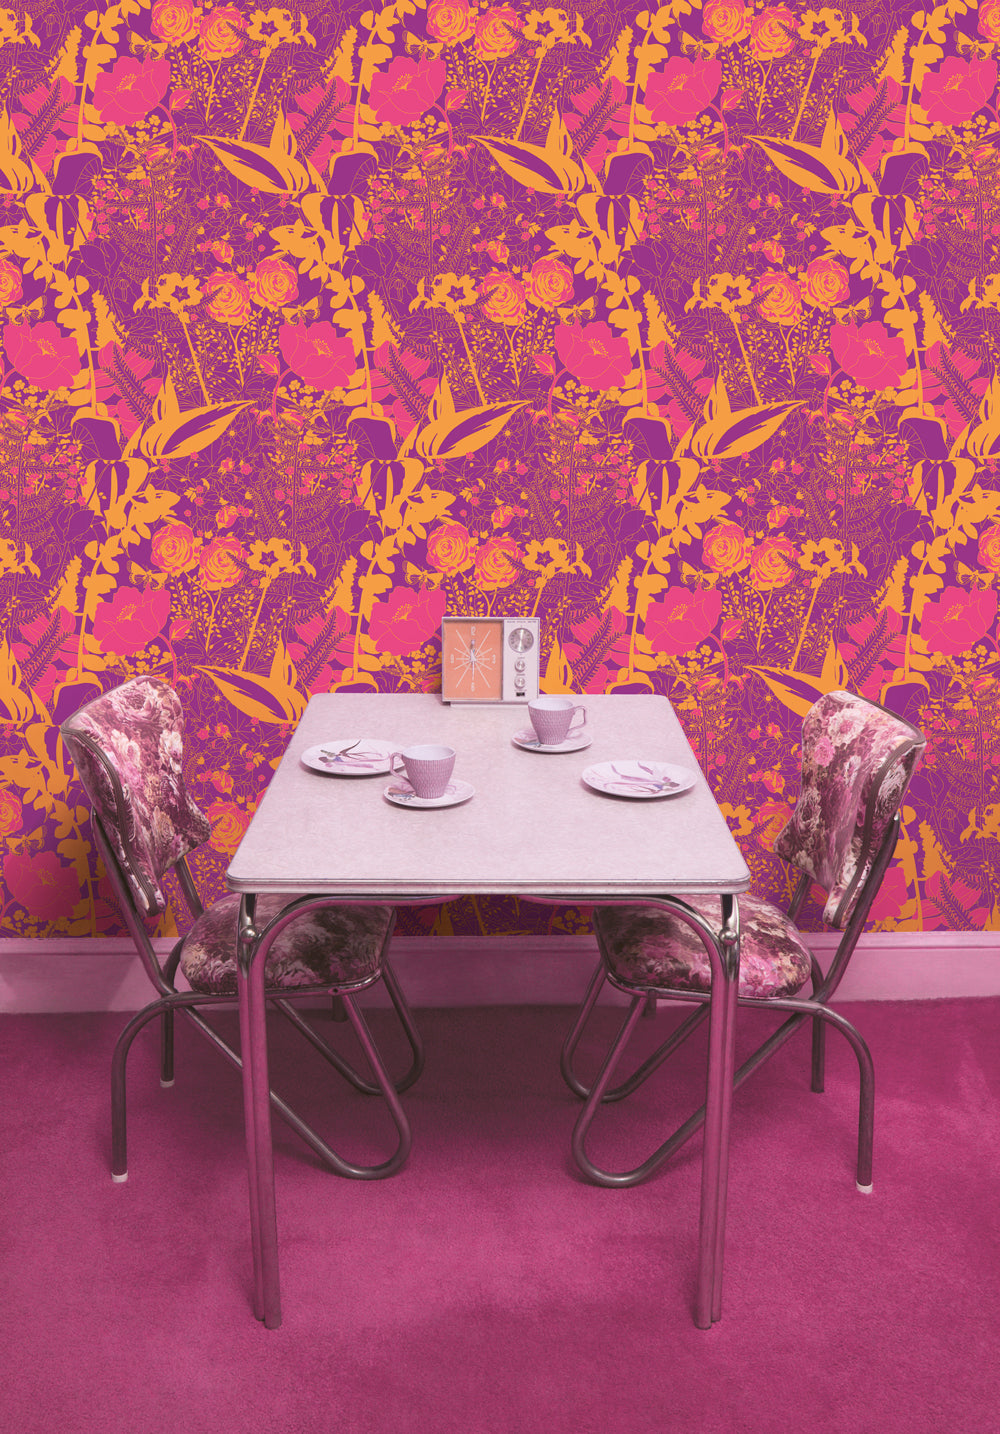 Cool retro 1960s wallpaper by Dupenny. Purple, magenta and orange floral pattern for walls